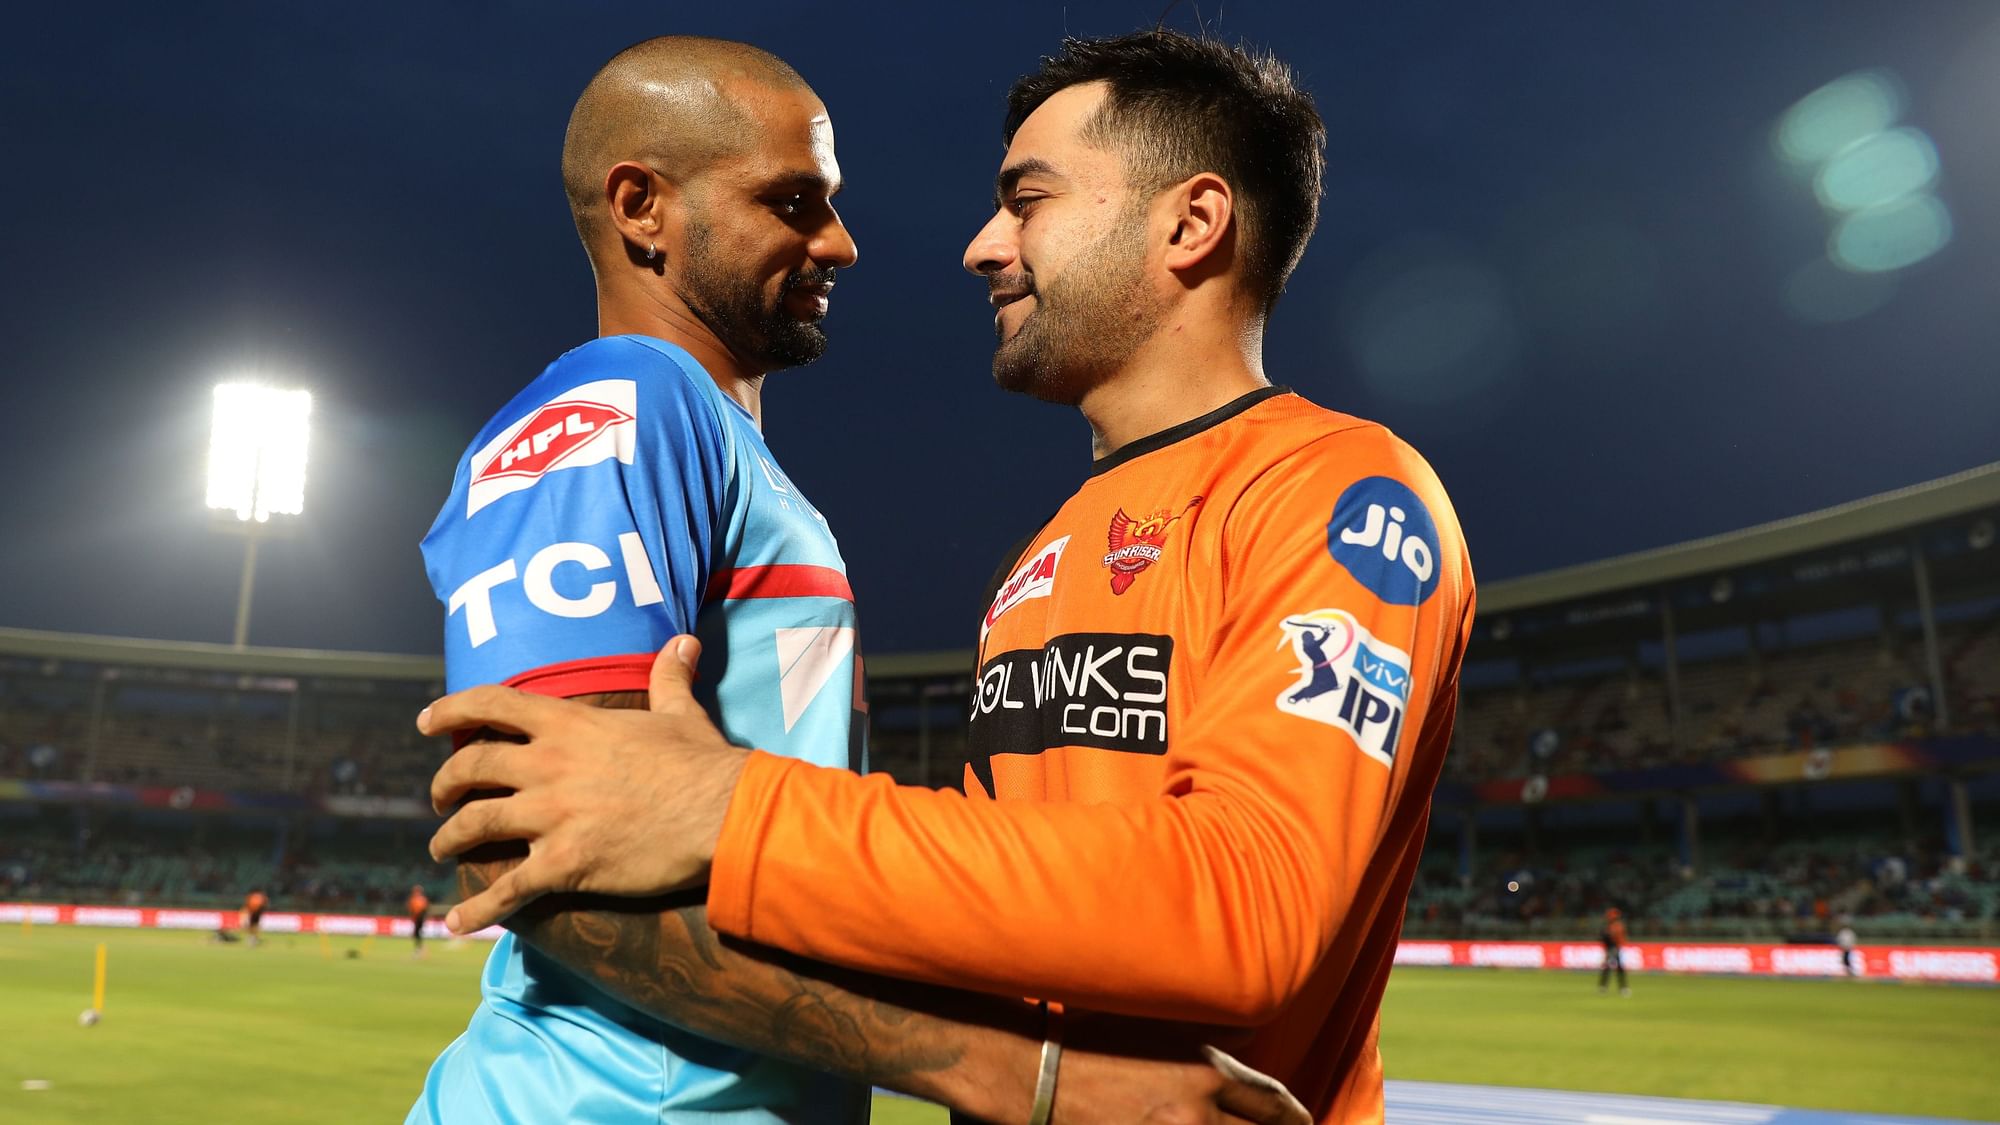 Both Dhawan and Rashid have been key players for their teams on the way to the play-offs.